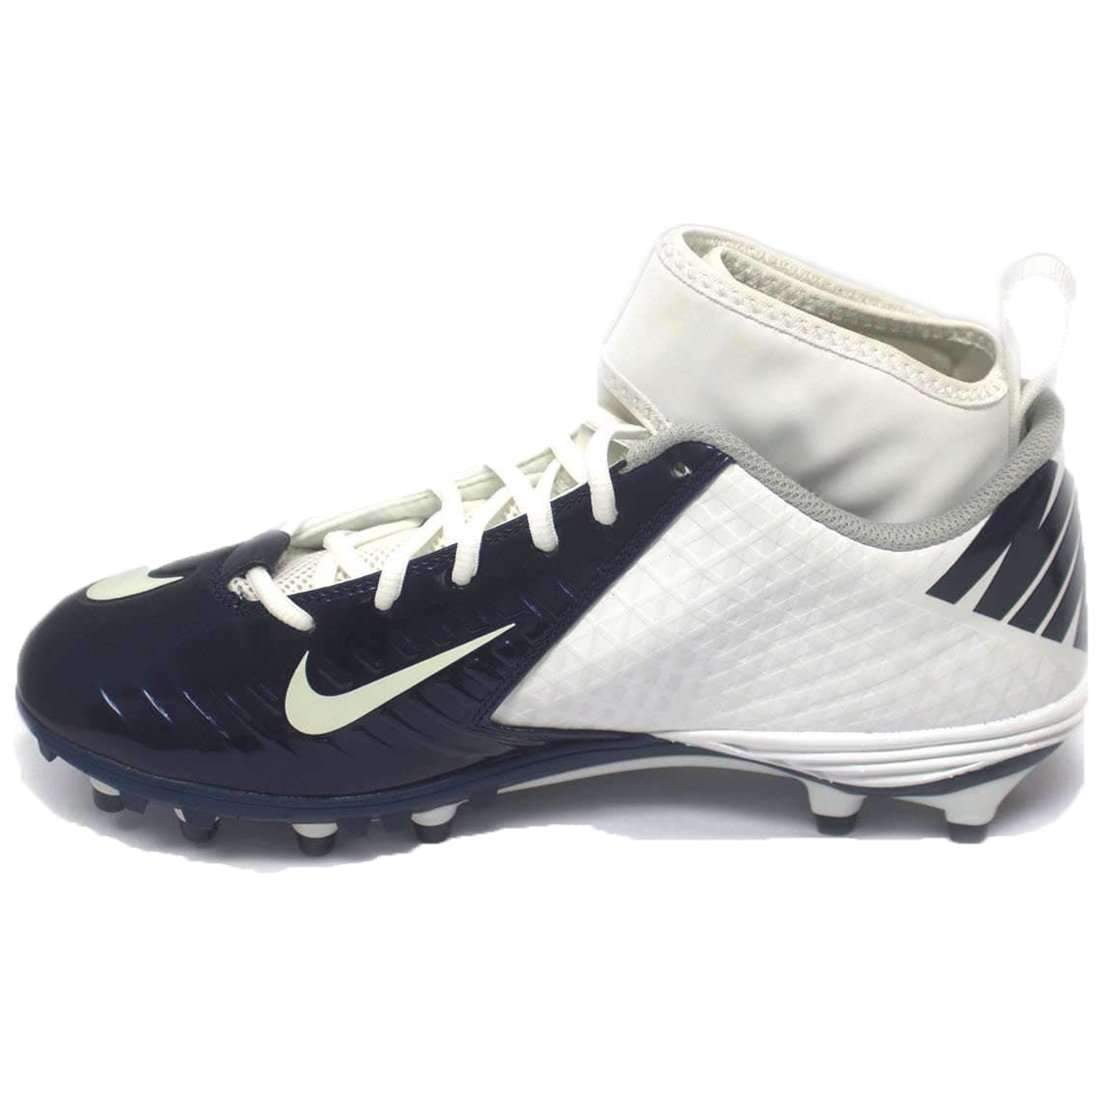 superbad cleats